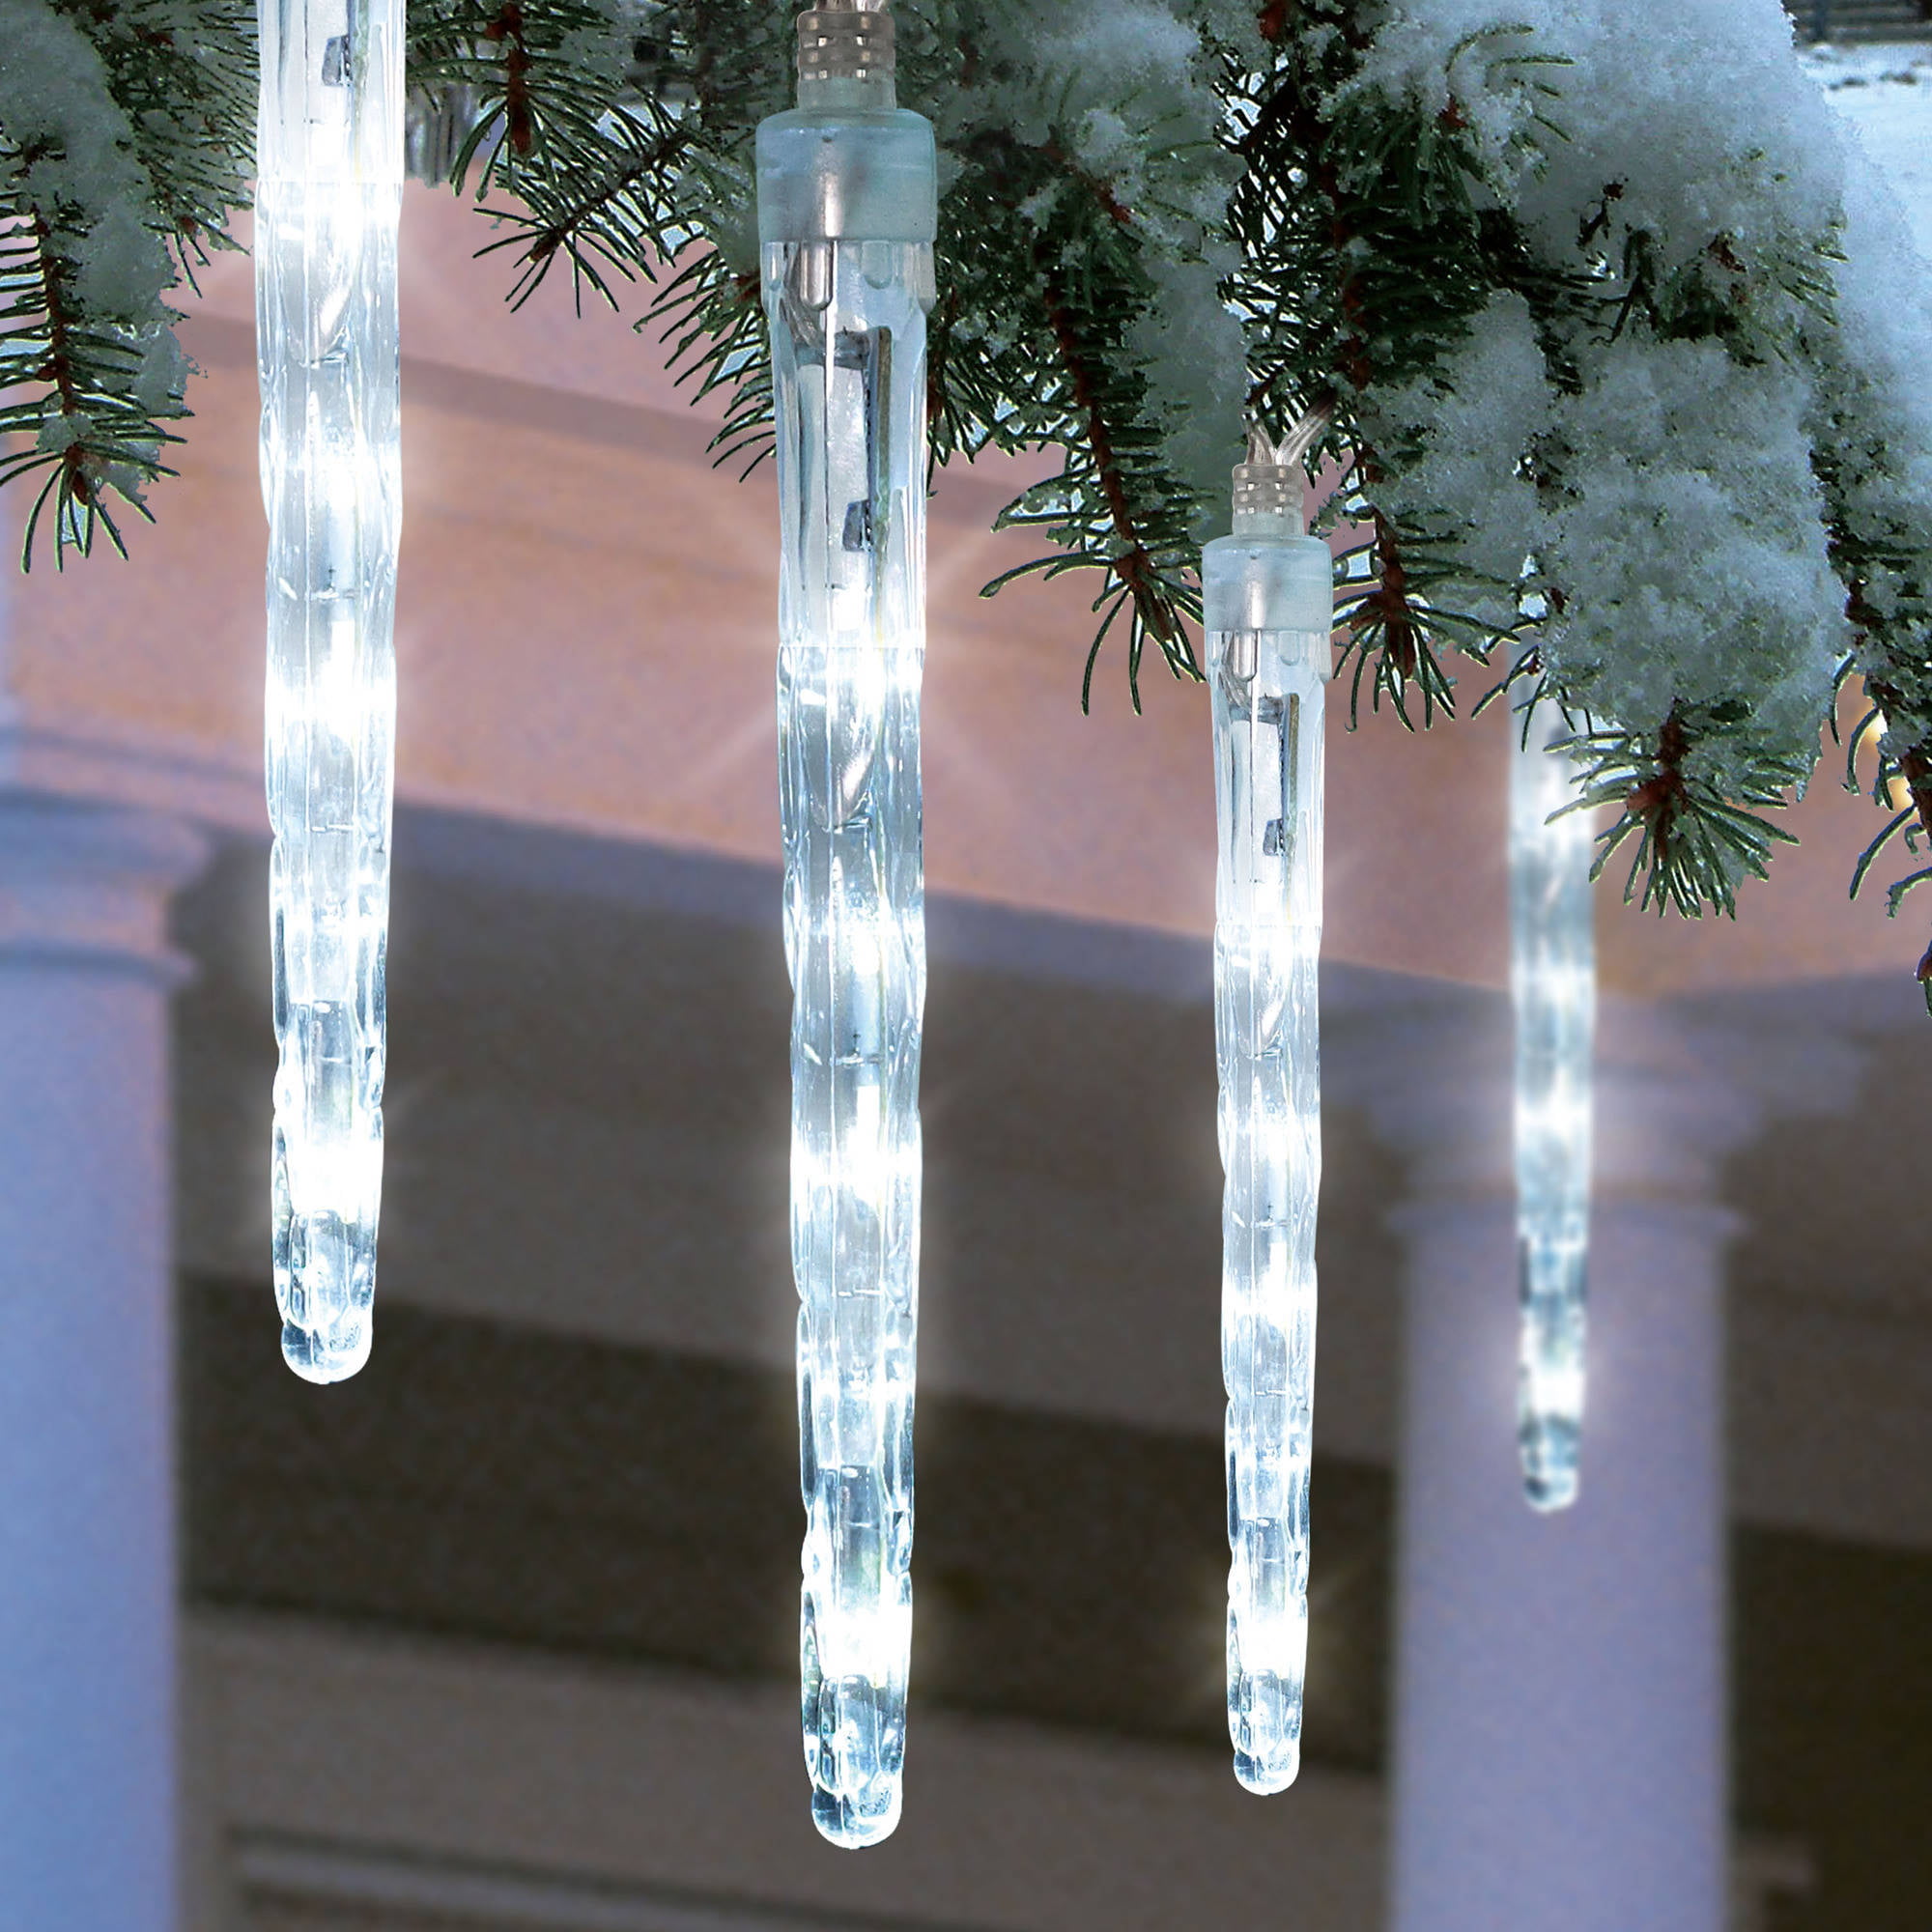 Holiday Time Battery Operated 8 Piece Led Dripping Icicle Christmas Lights Cool White 40 Count Walmart Com Walmart Com